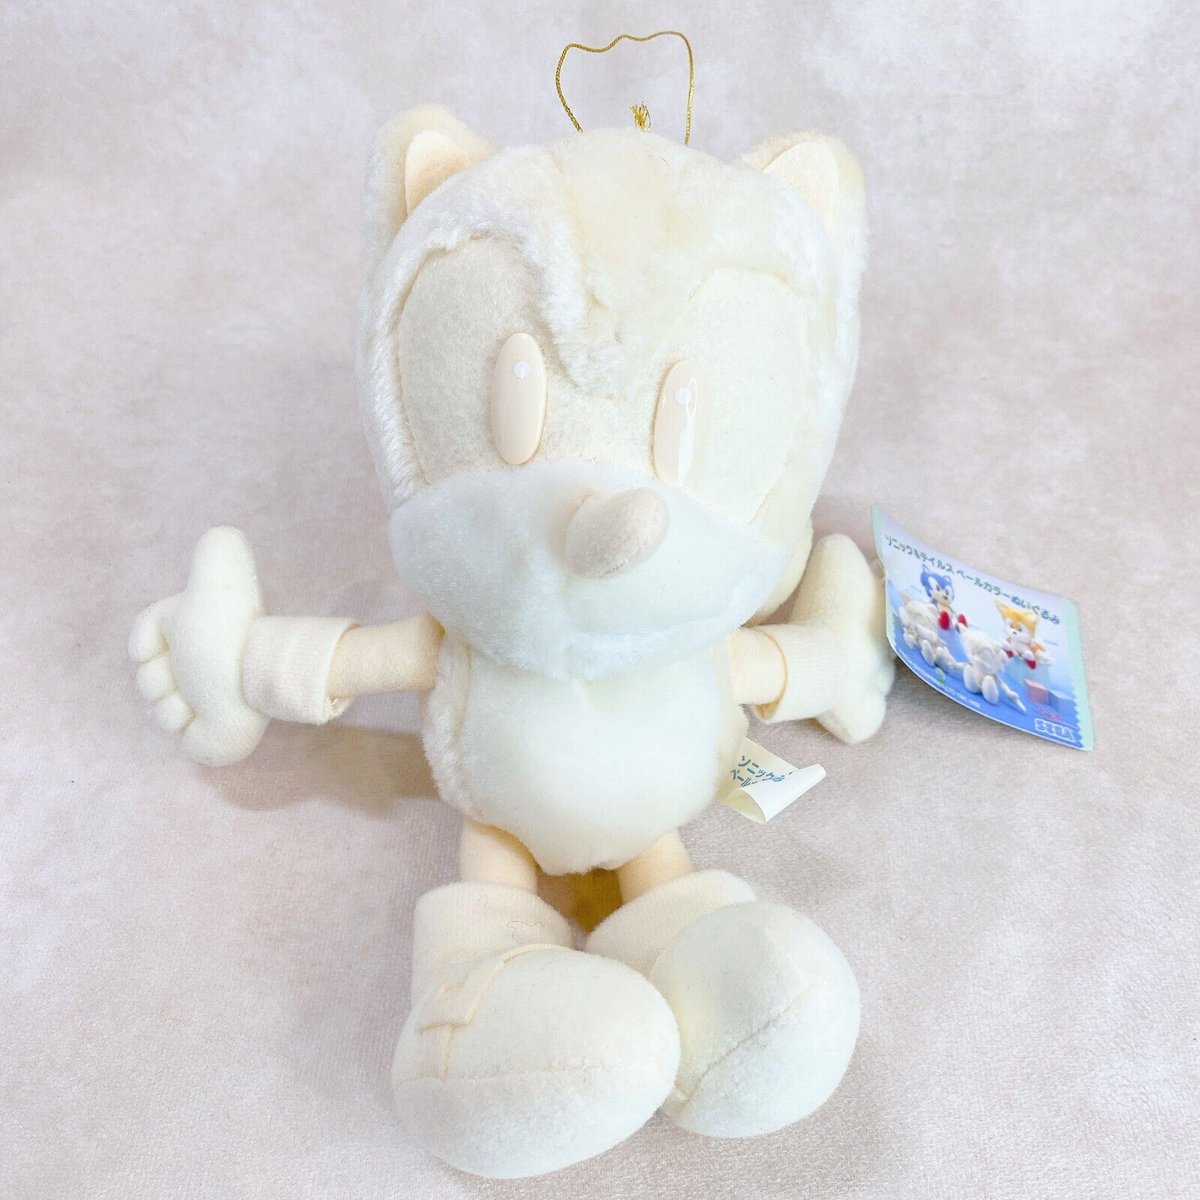 did u guys know that the moldy mario plush also has a best friend, moldy sonic?